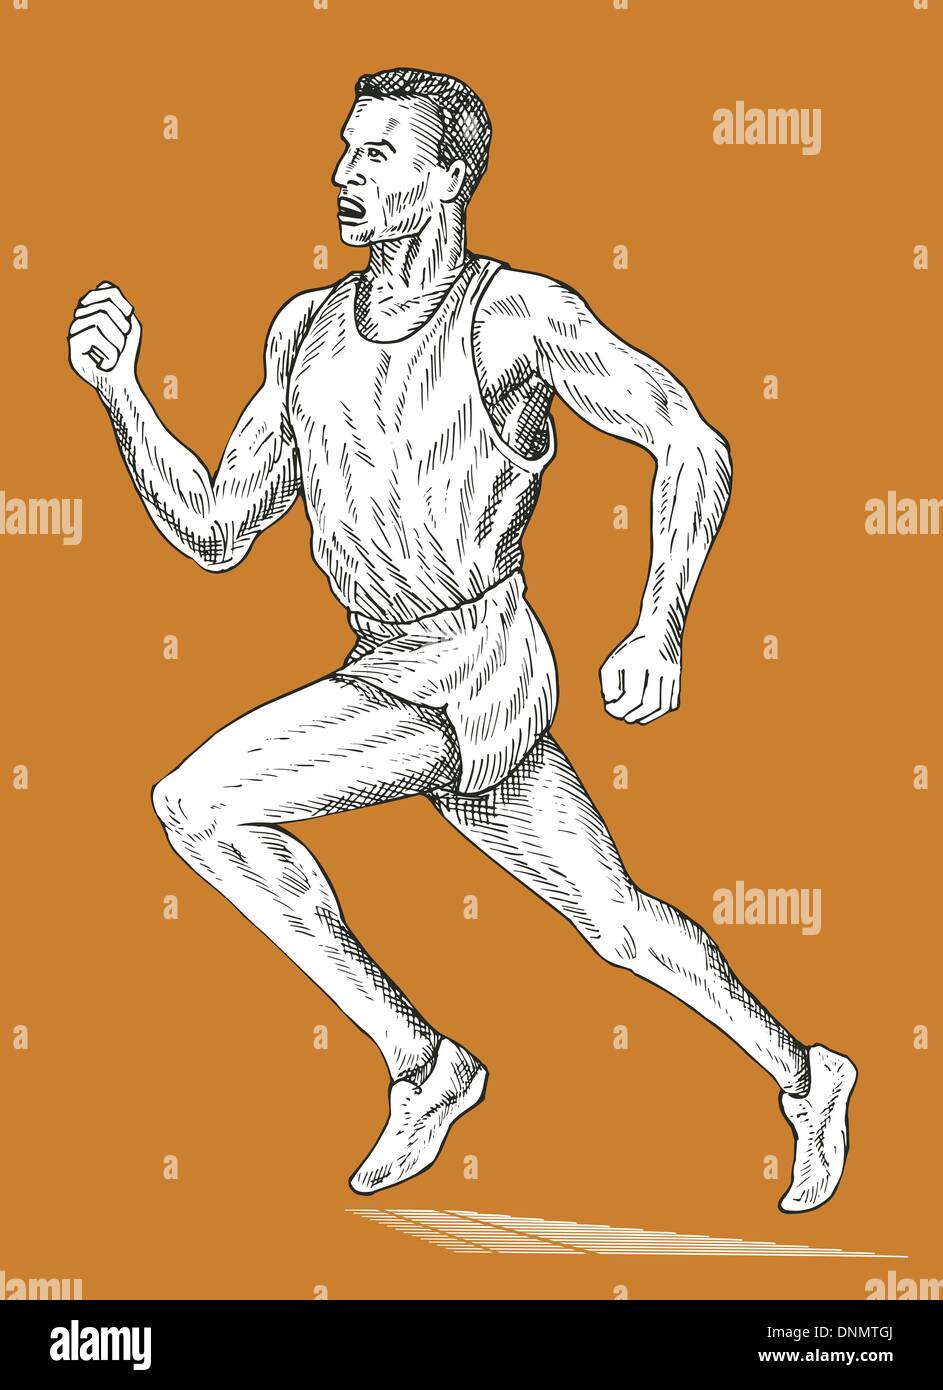 4411 Drawing Running Track Images Stock Photos  Vectors  Shutterstock